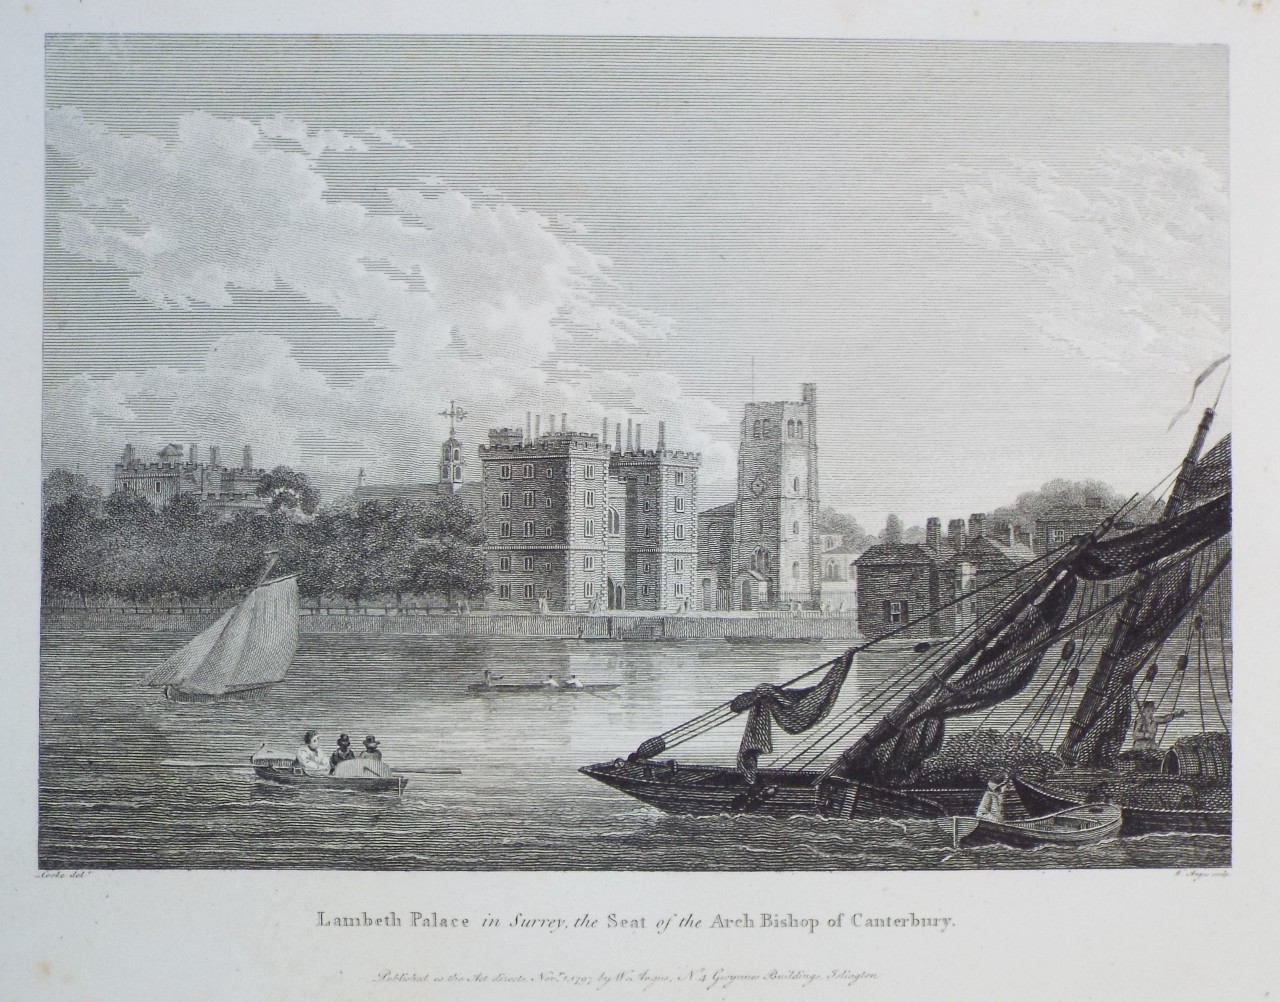 Print - Lambeth Palace in Surrey, the Seat of the Arch Bishop of Canterbury. - Angus